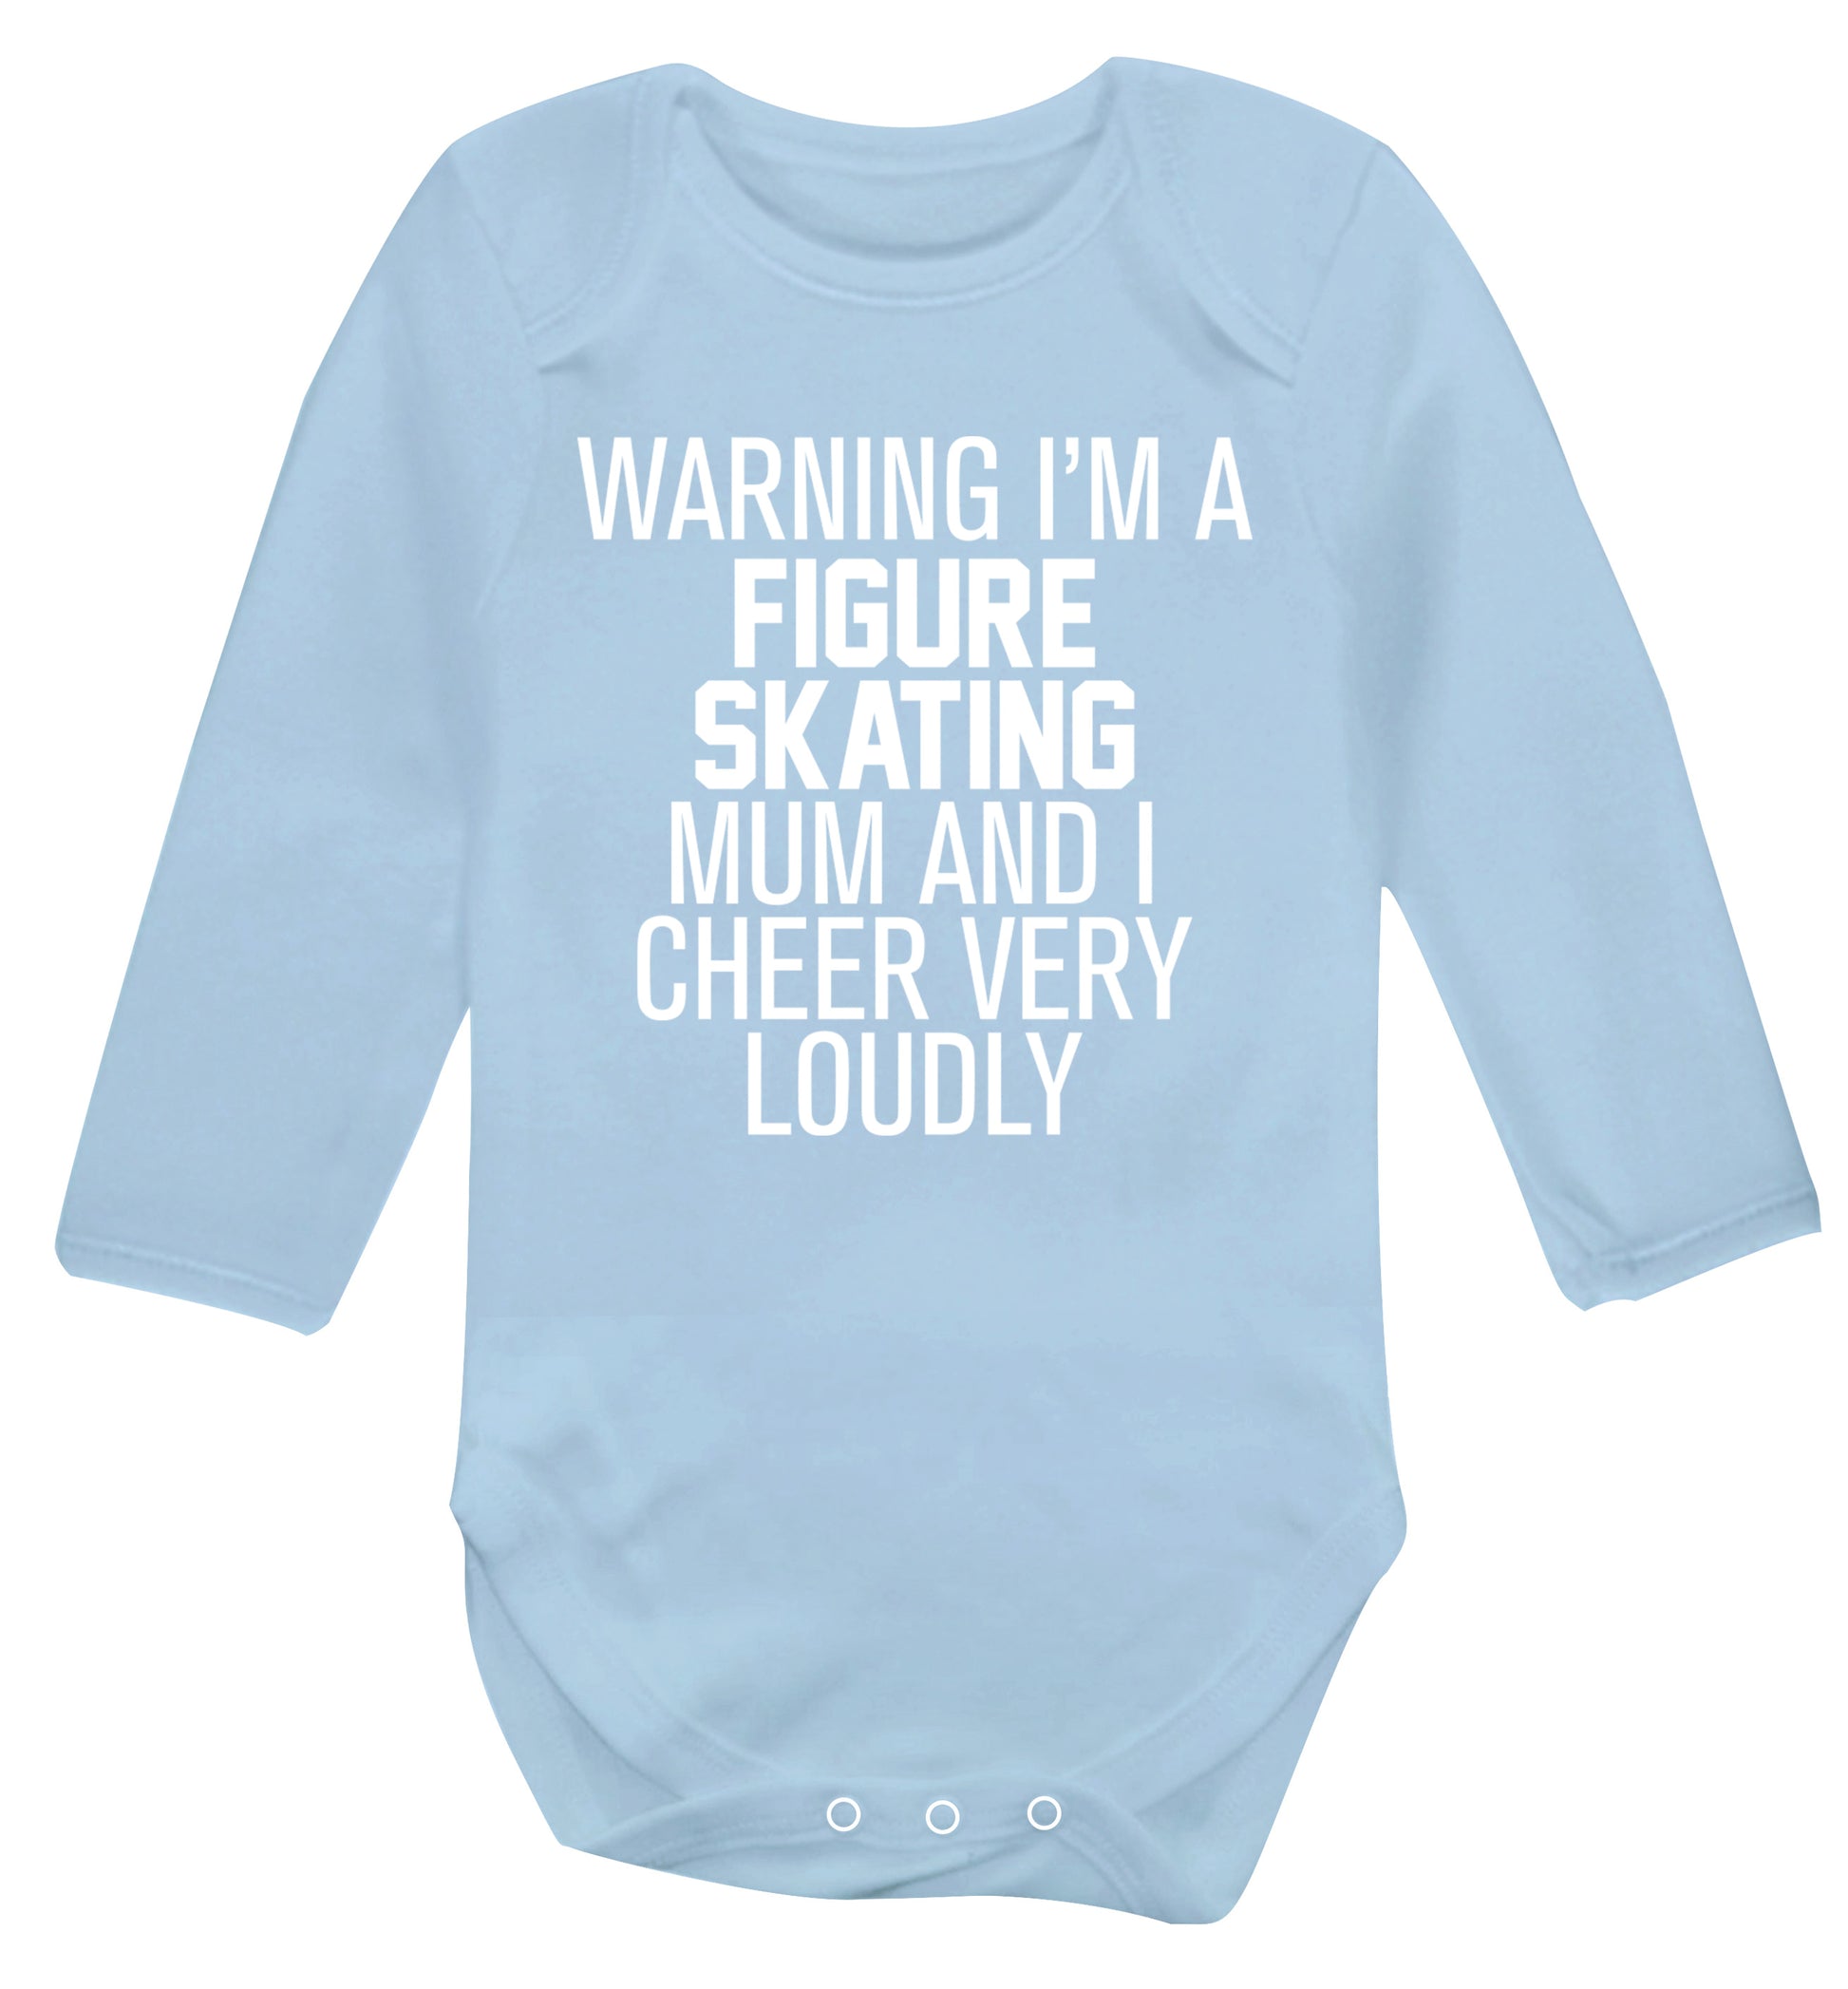 Warning I'm a figure skating mum and I cheer very loudly Baby Vest long sleeved pale blue 6-12 months